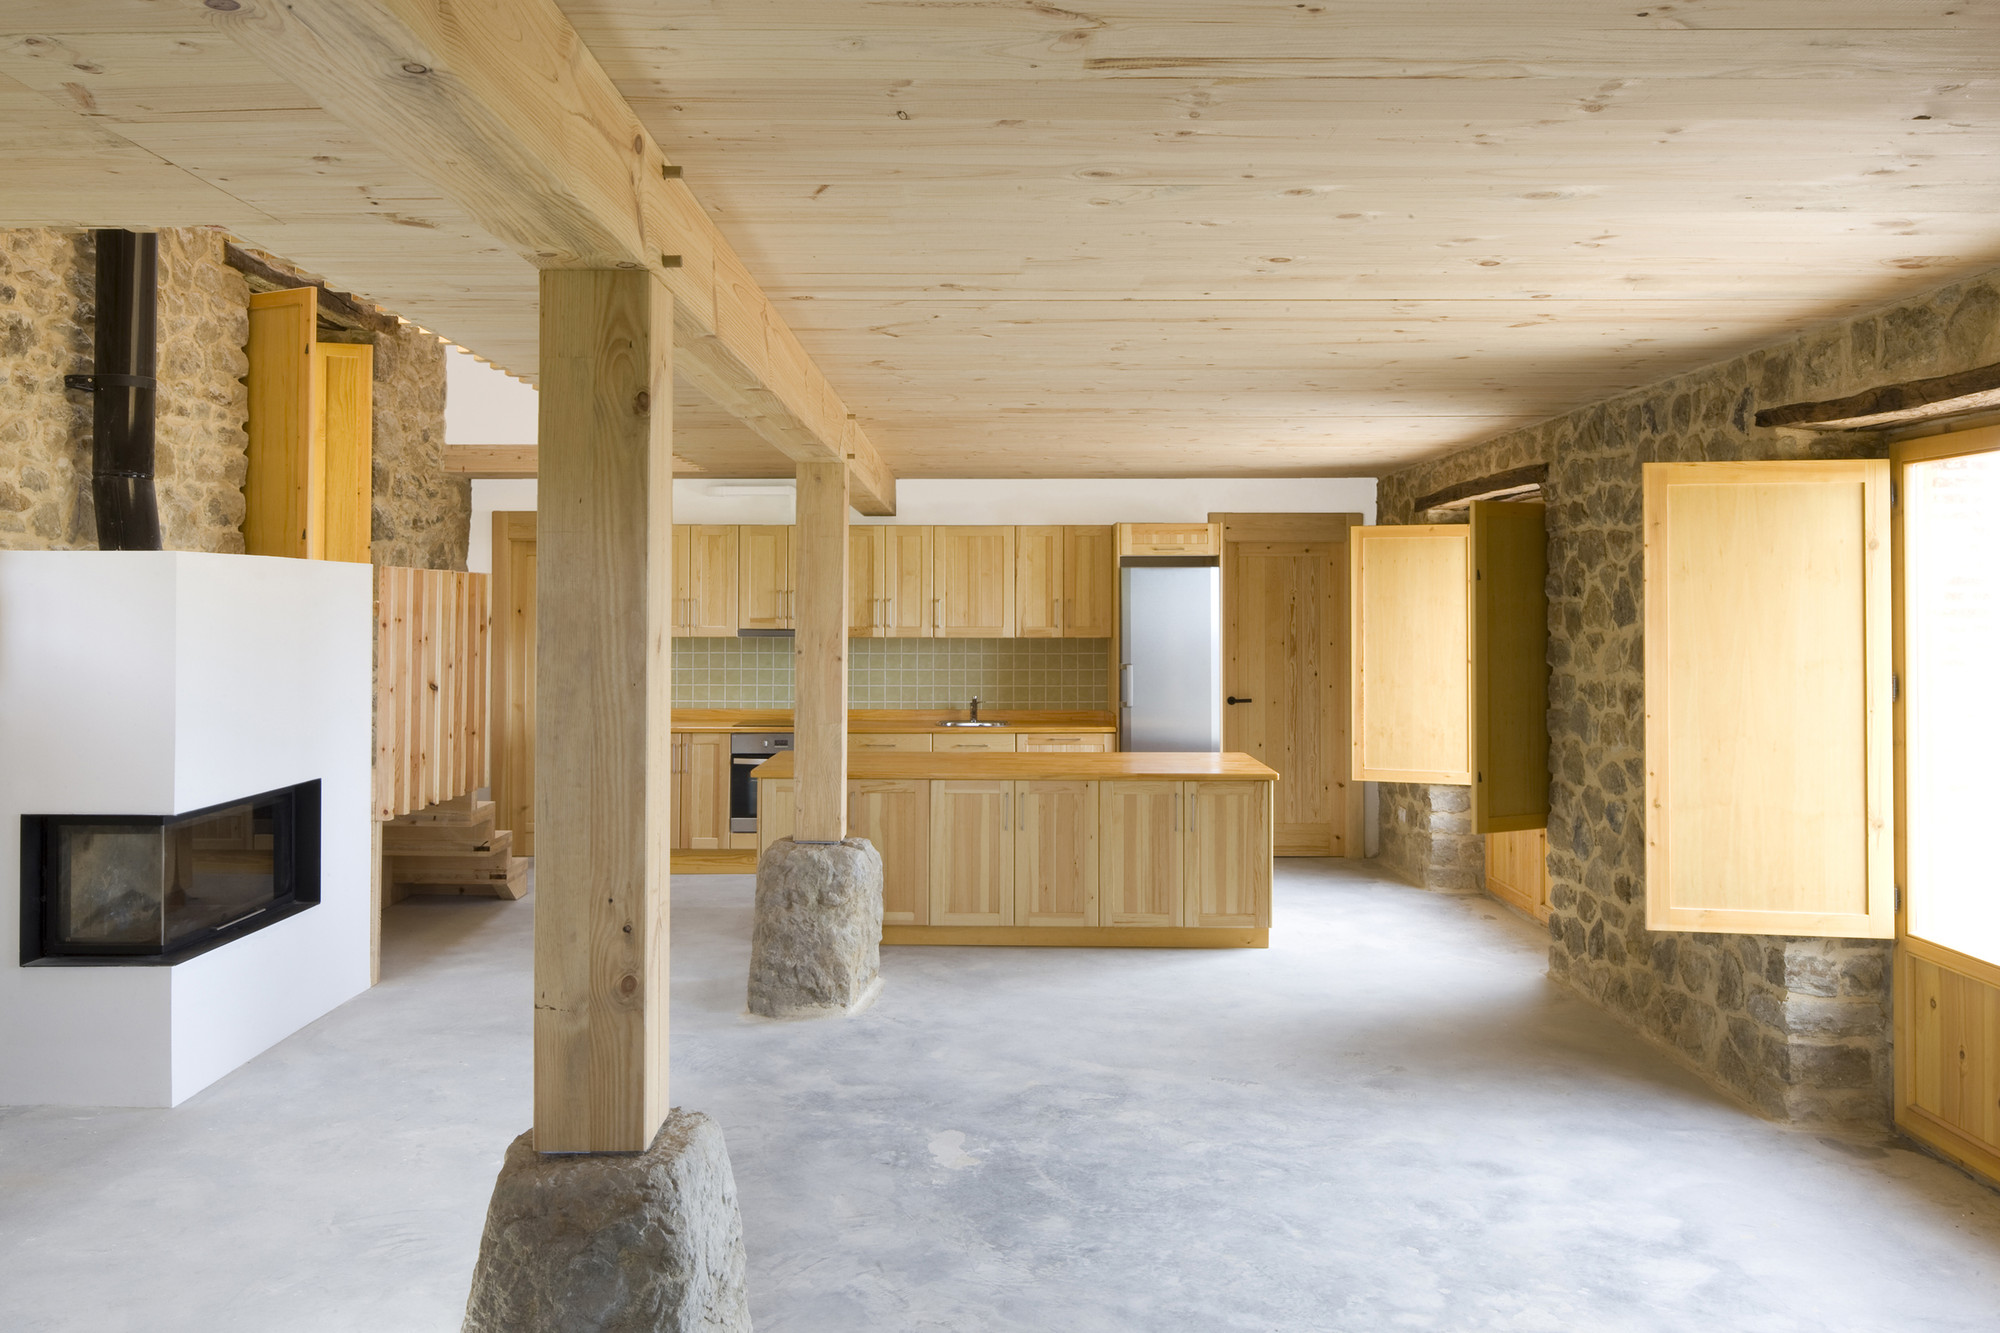 Country House Renovation / 2260mm Arquitectes | ArchDaily